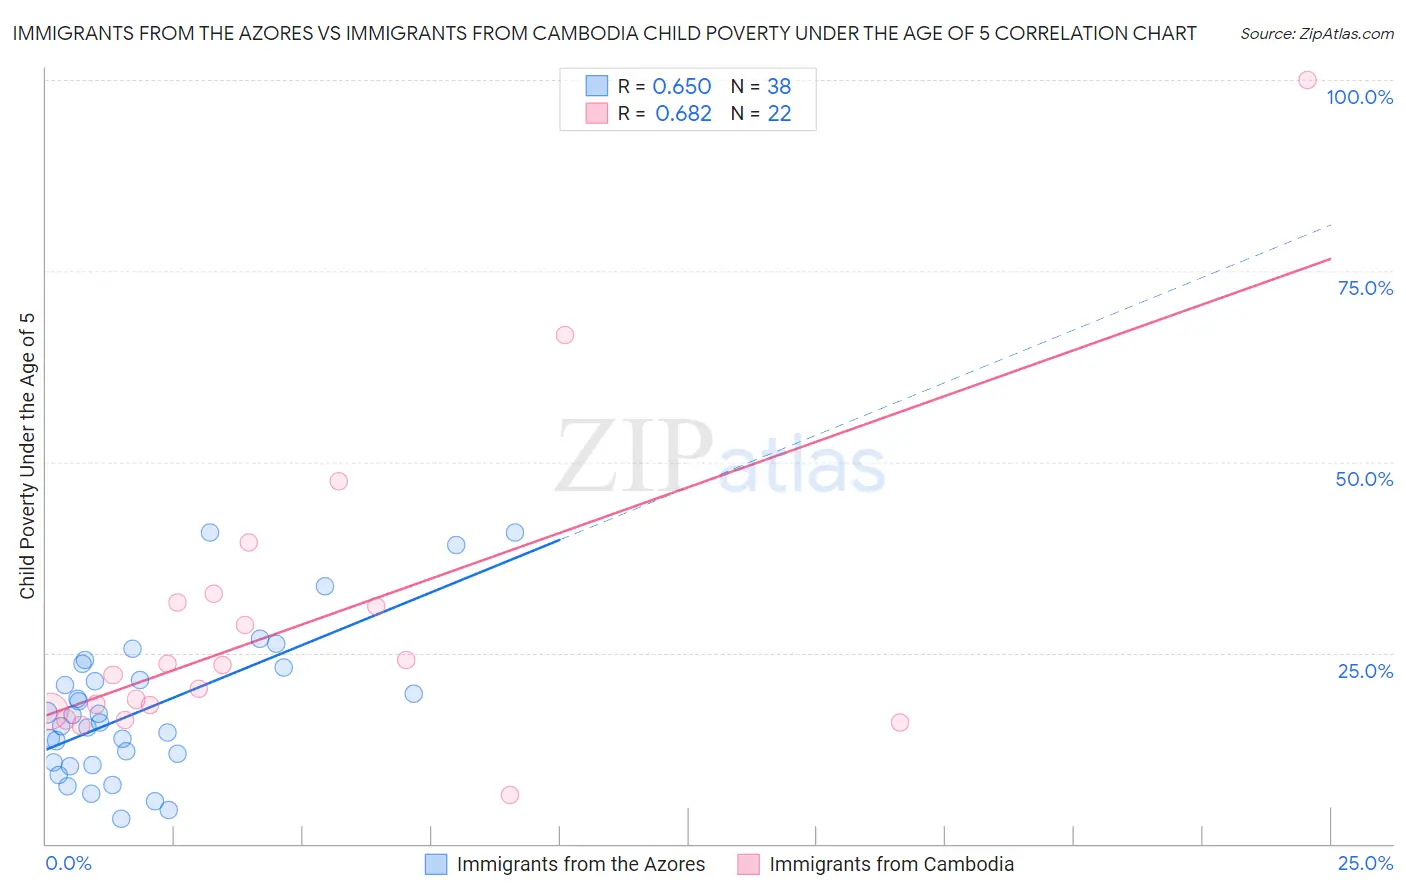 Immigrants from the Azores vs Immigrants from Cambodia Child Poverty Under the Age of 5